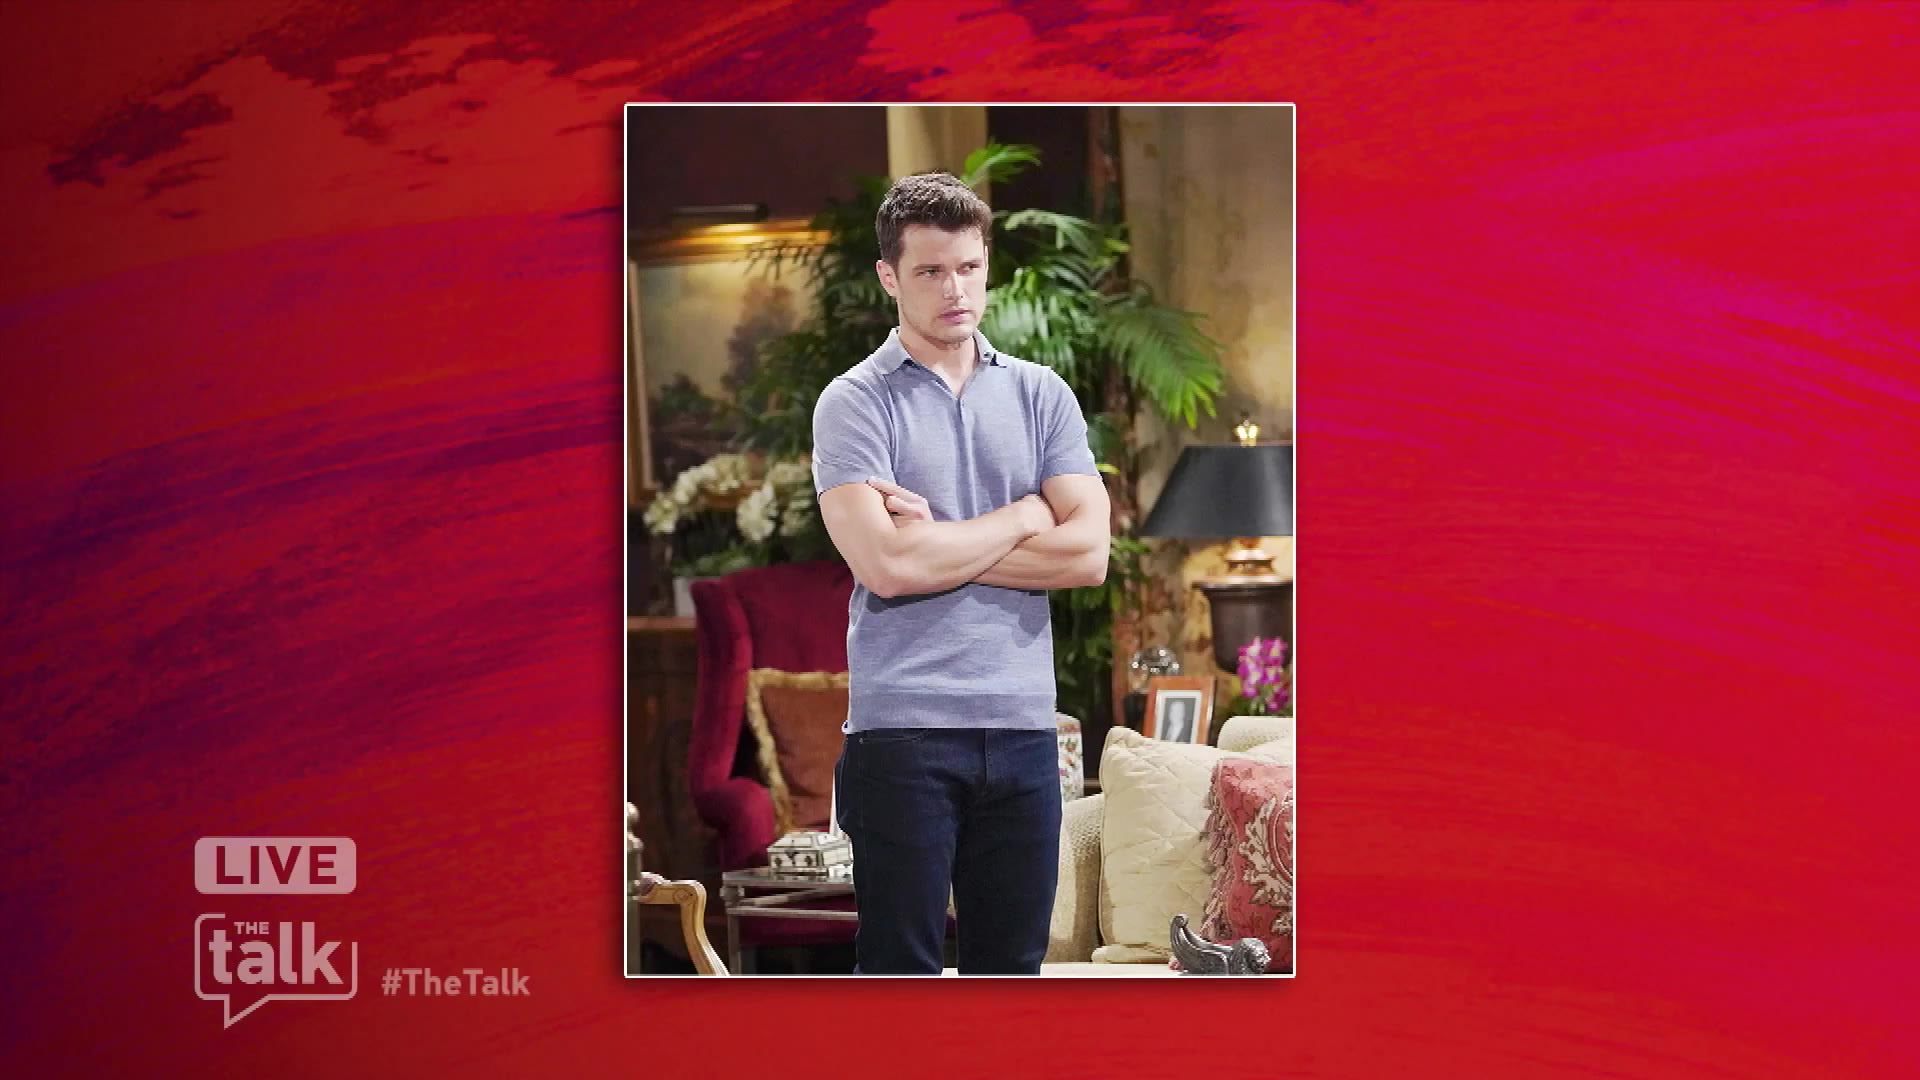 The Young and the Restless': Michael Mealor Return Date Revealed